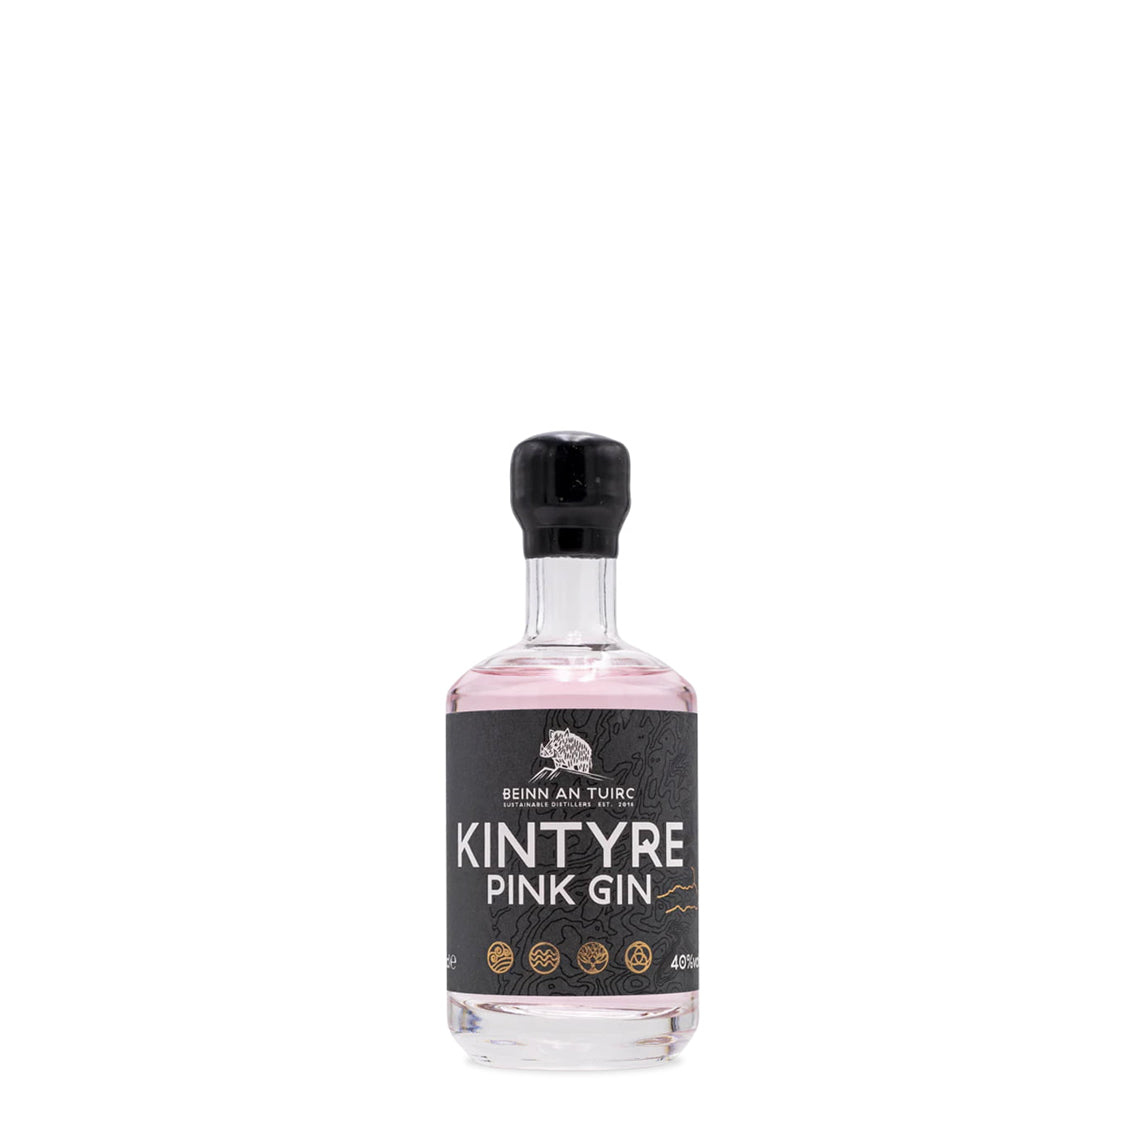 Kintyre Pink Gin, 5cl - Miniature